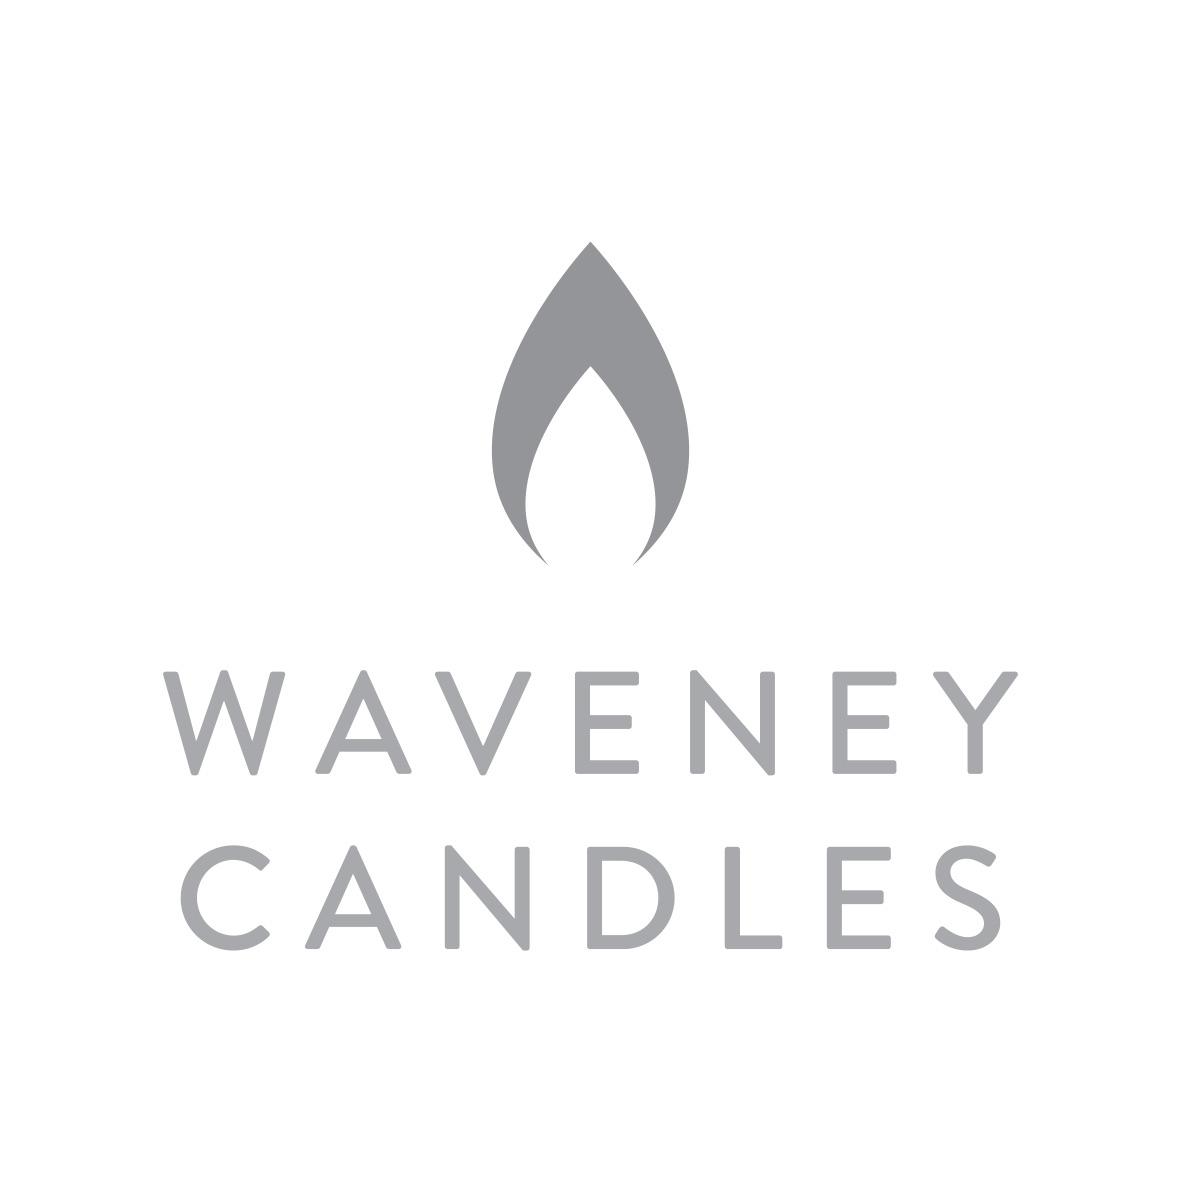 Waveney Candles's images